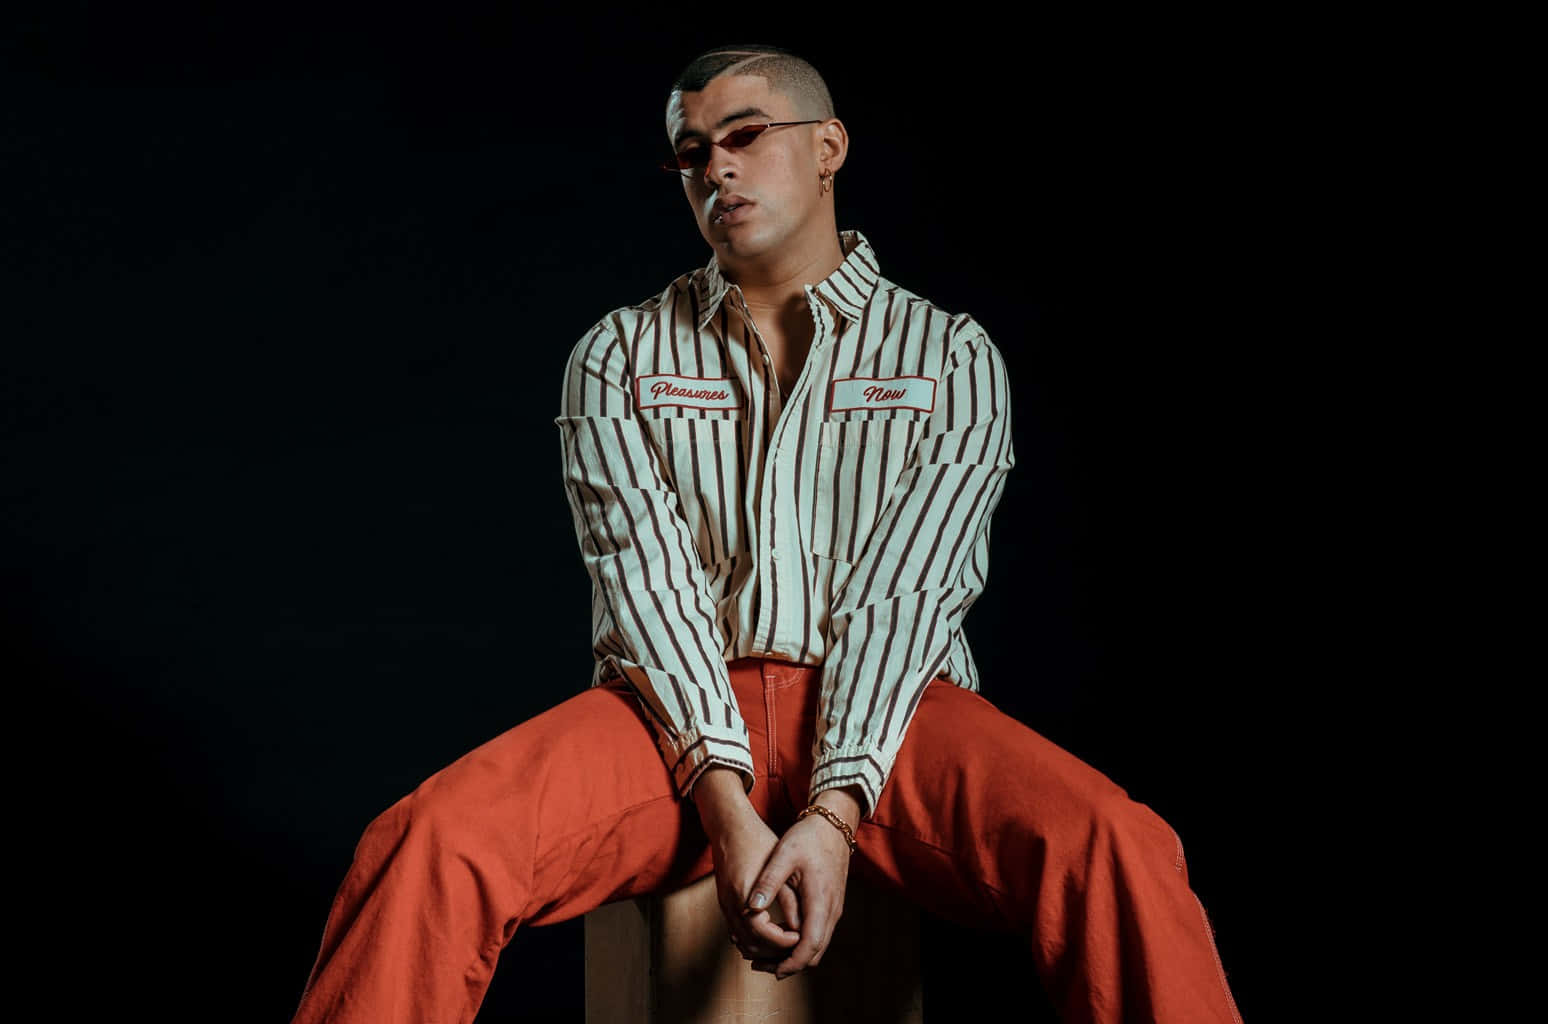 "Bad Bunny making a statement in the music industry"